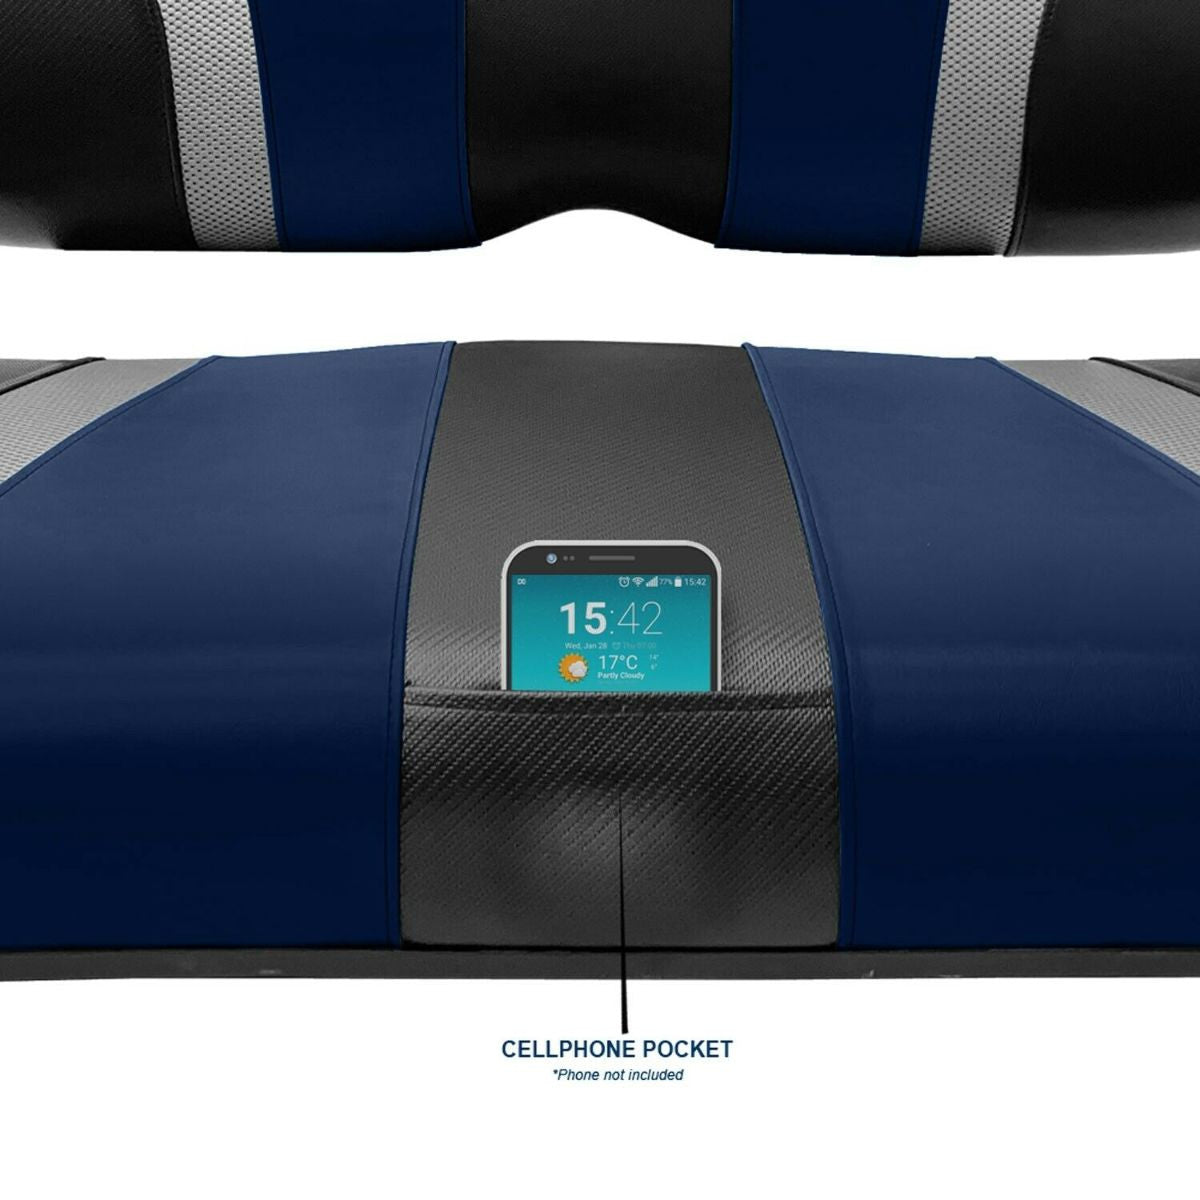 SlipStream Front Seat Cover Set Navy Blue/Liquid Silver - Fits Precedent/Onward/Tempo (2004-up)